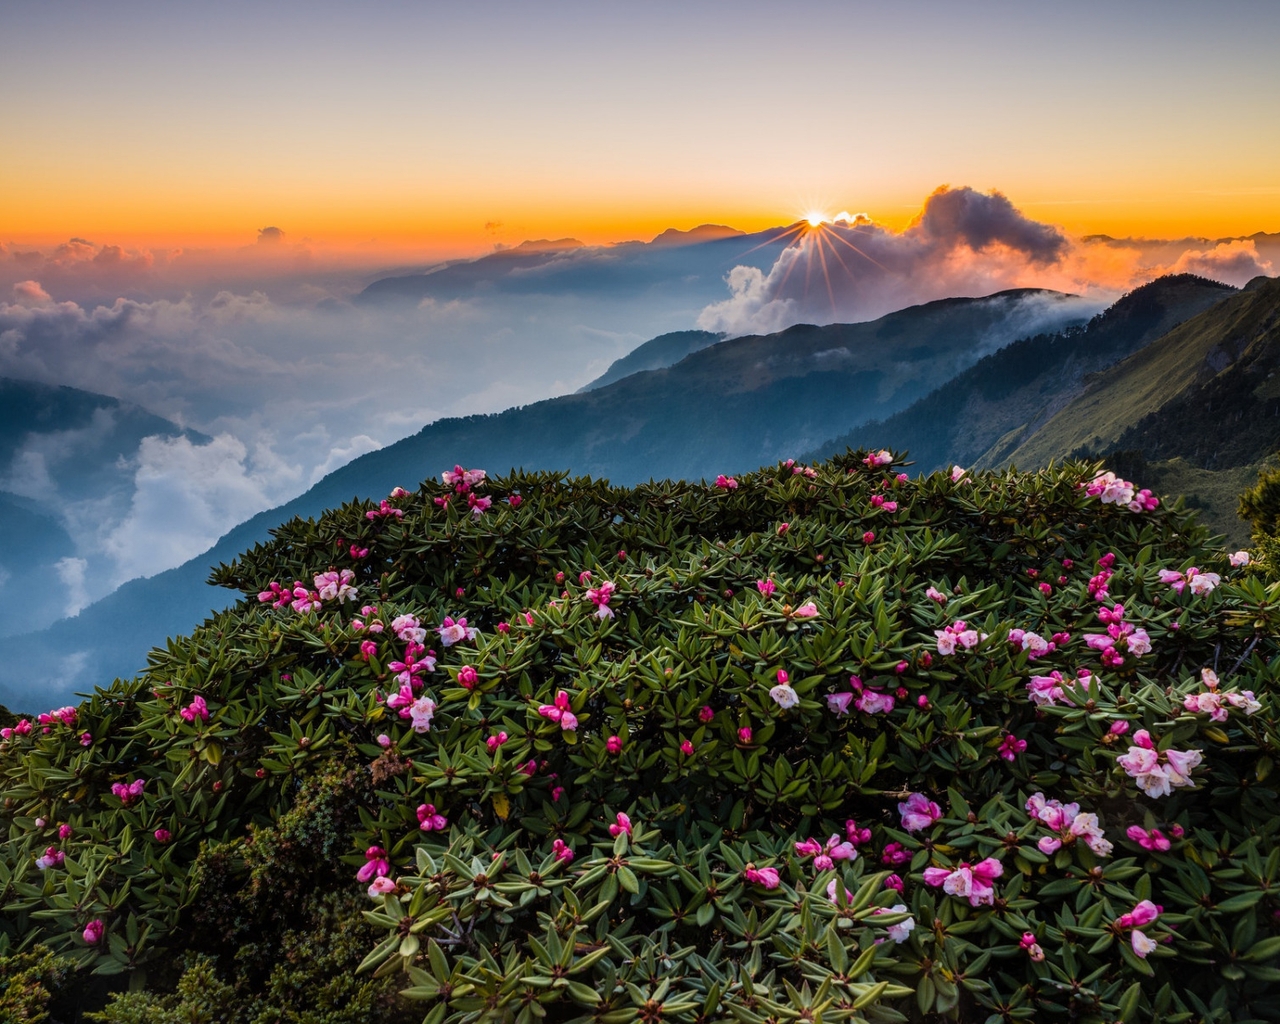 Image: Slope, sky, hill, mountains, flowers, greens, clouds, sunset